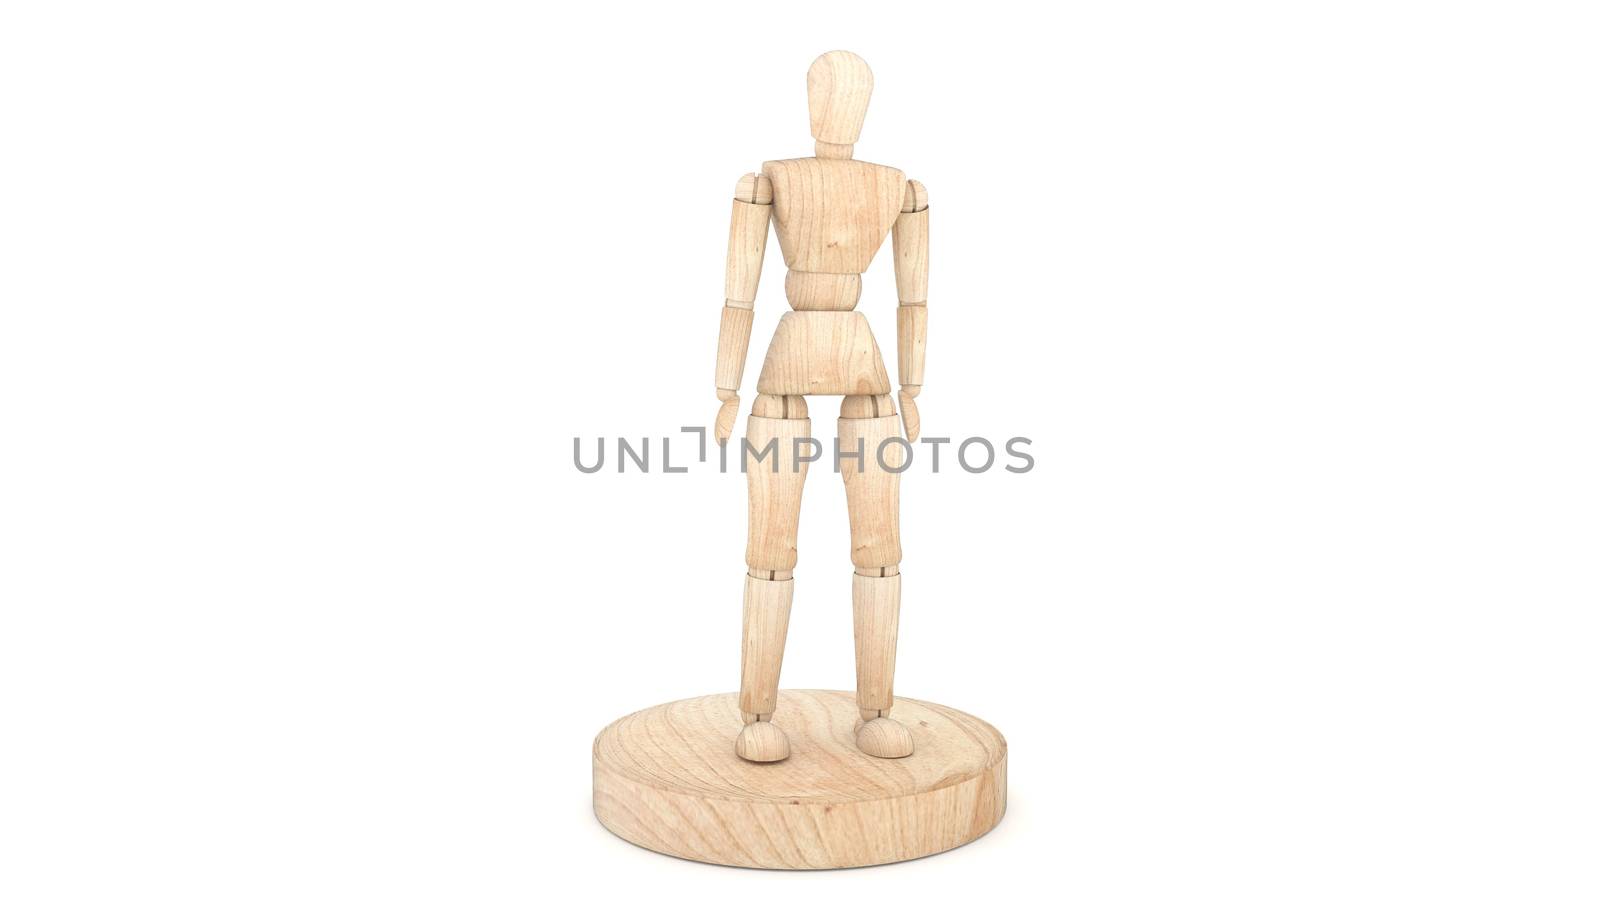 Wooden Dummy Stand, Show, Present. 3D rendering by Minny0012011@hotmail.com